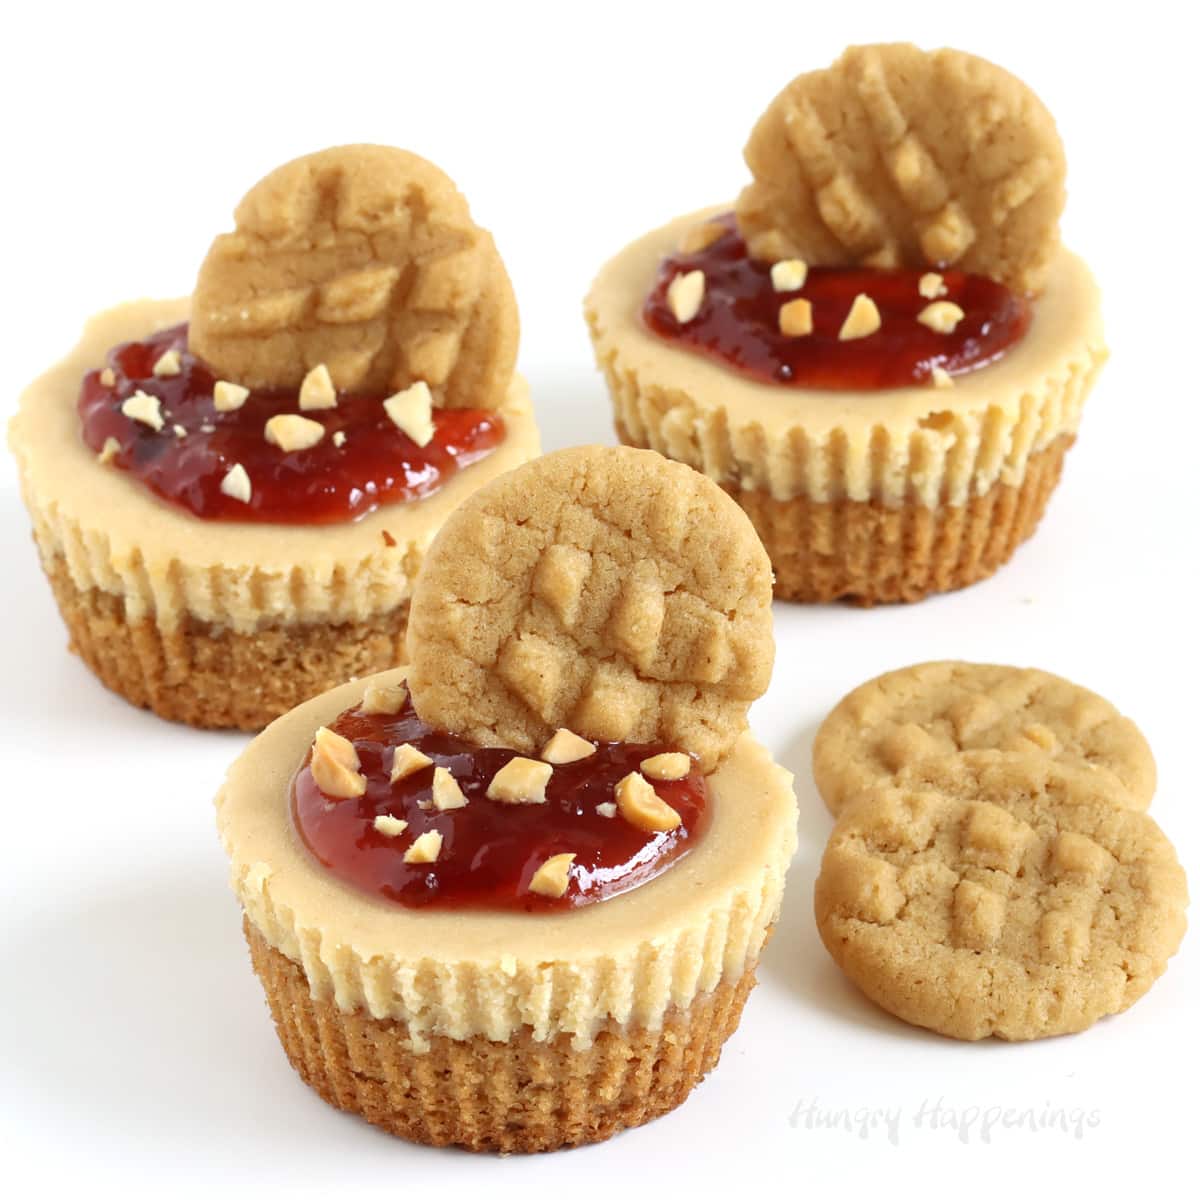 Mini peanut butter and jelly cheesecakes on peanut butter cookie crusts are topped with jam, chopped nuts, and mini cookies.